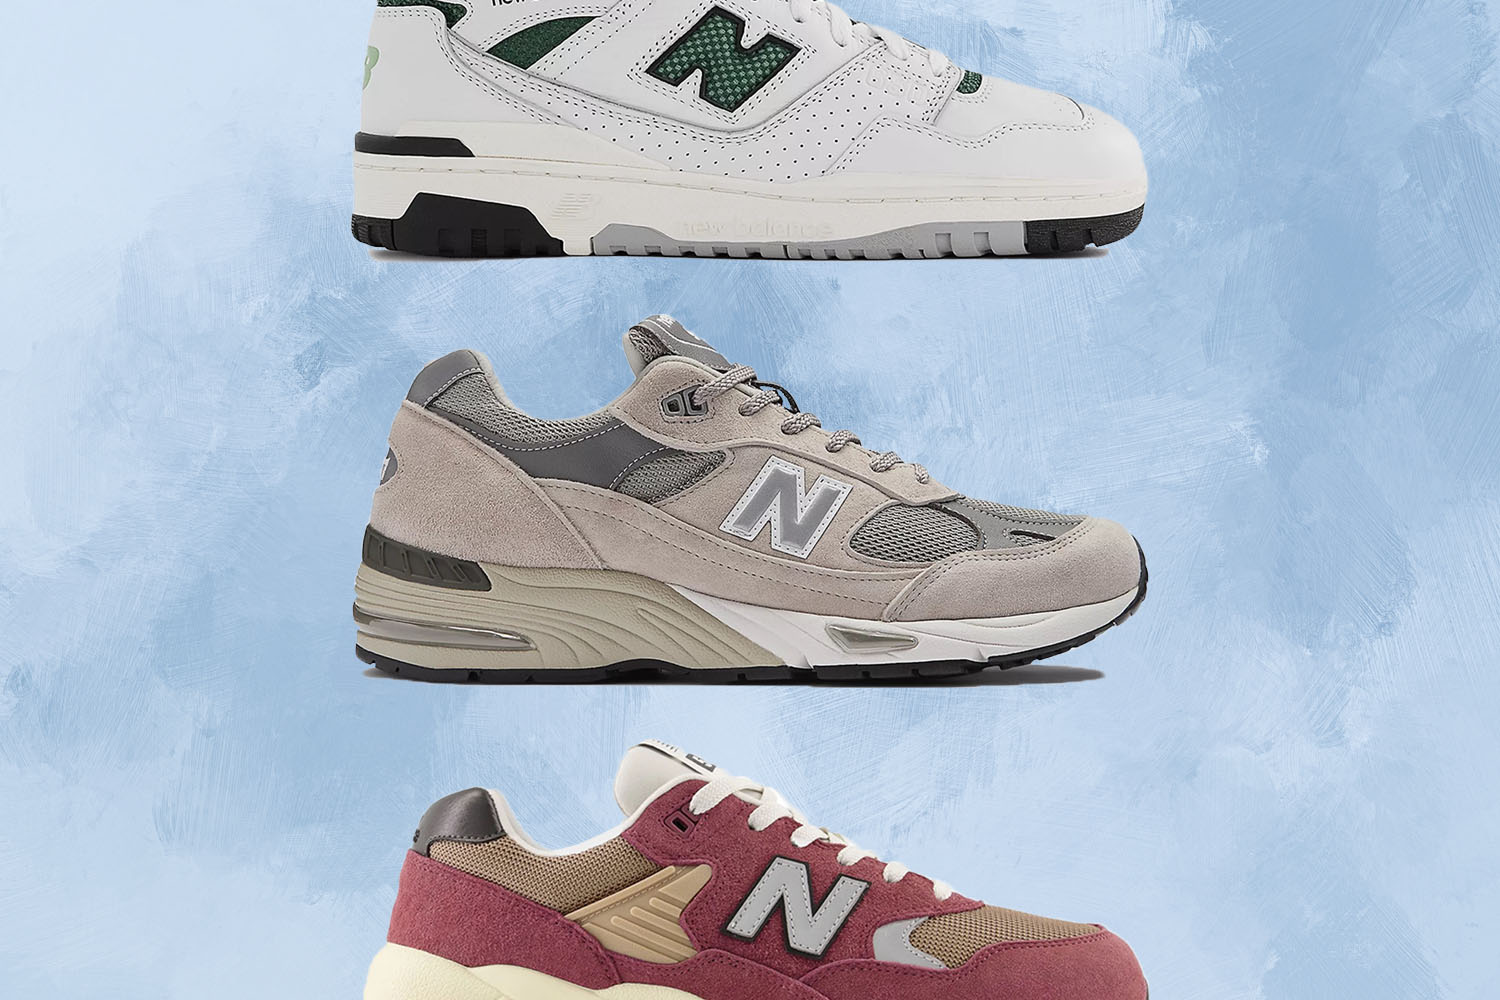 Top 10 New Balance Sneakers Of 2022